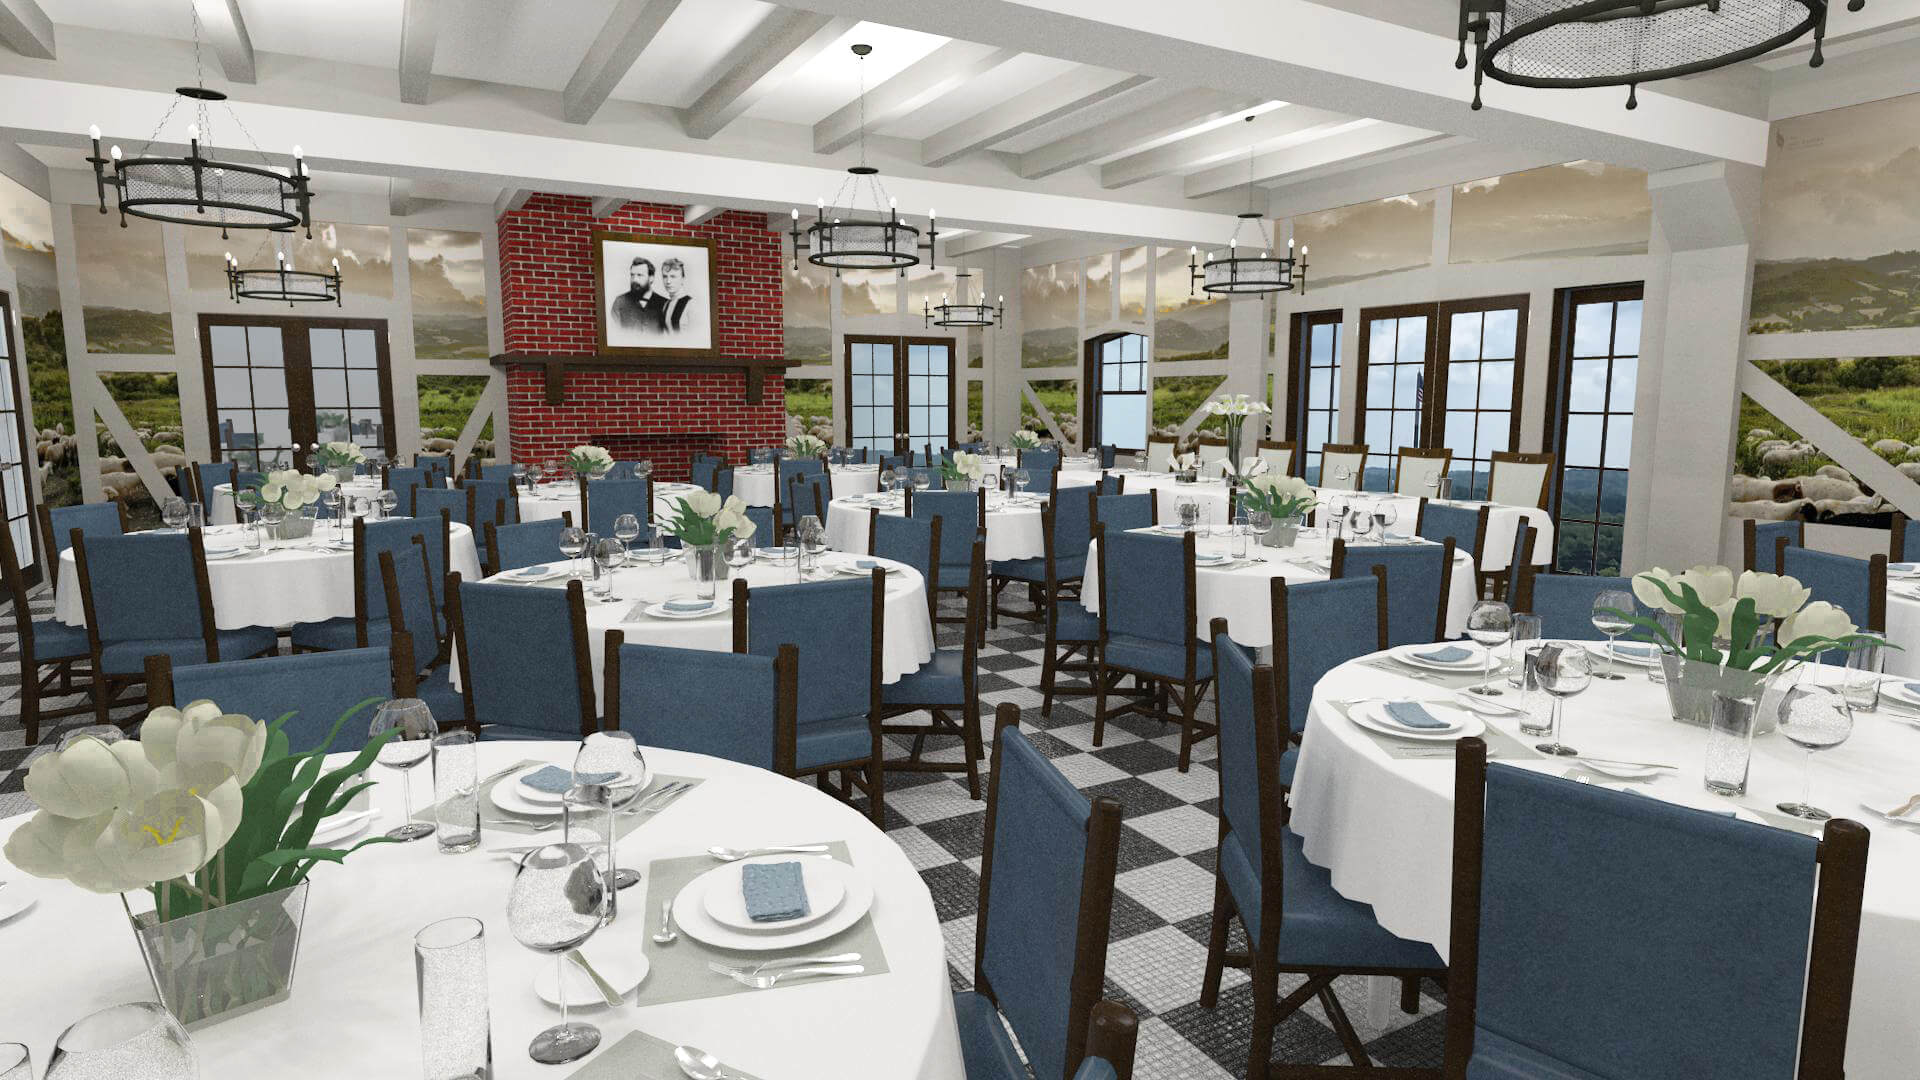 Rendering of new proposed club room within Kaskaskia hotel. Blue chairs, white table clothes and red brick fireplace